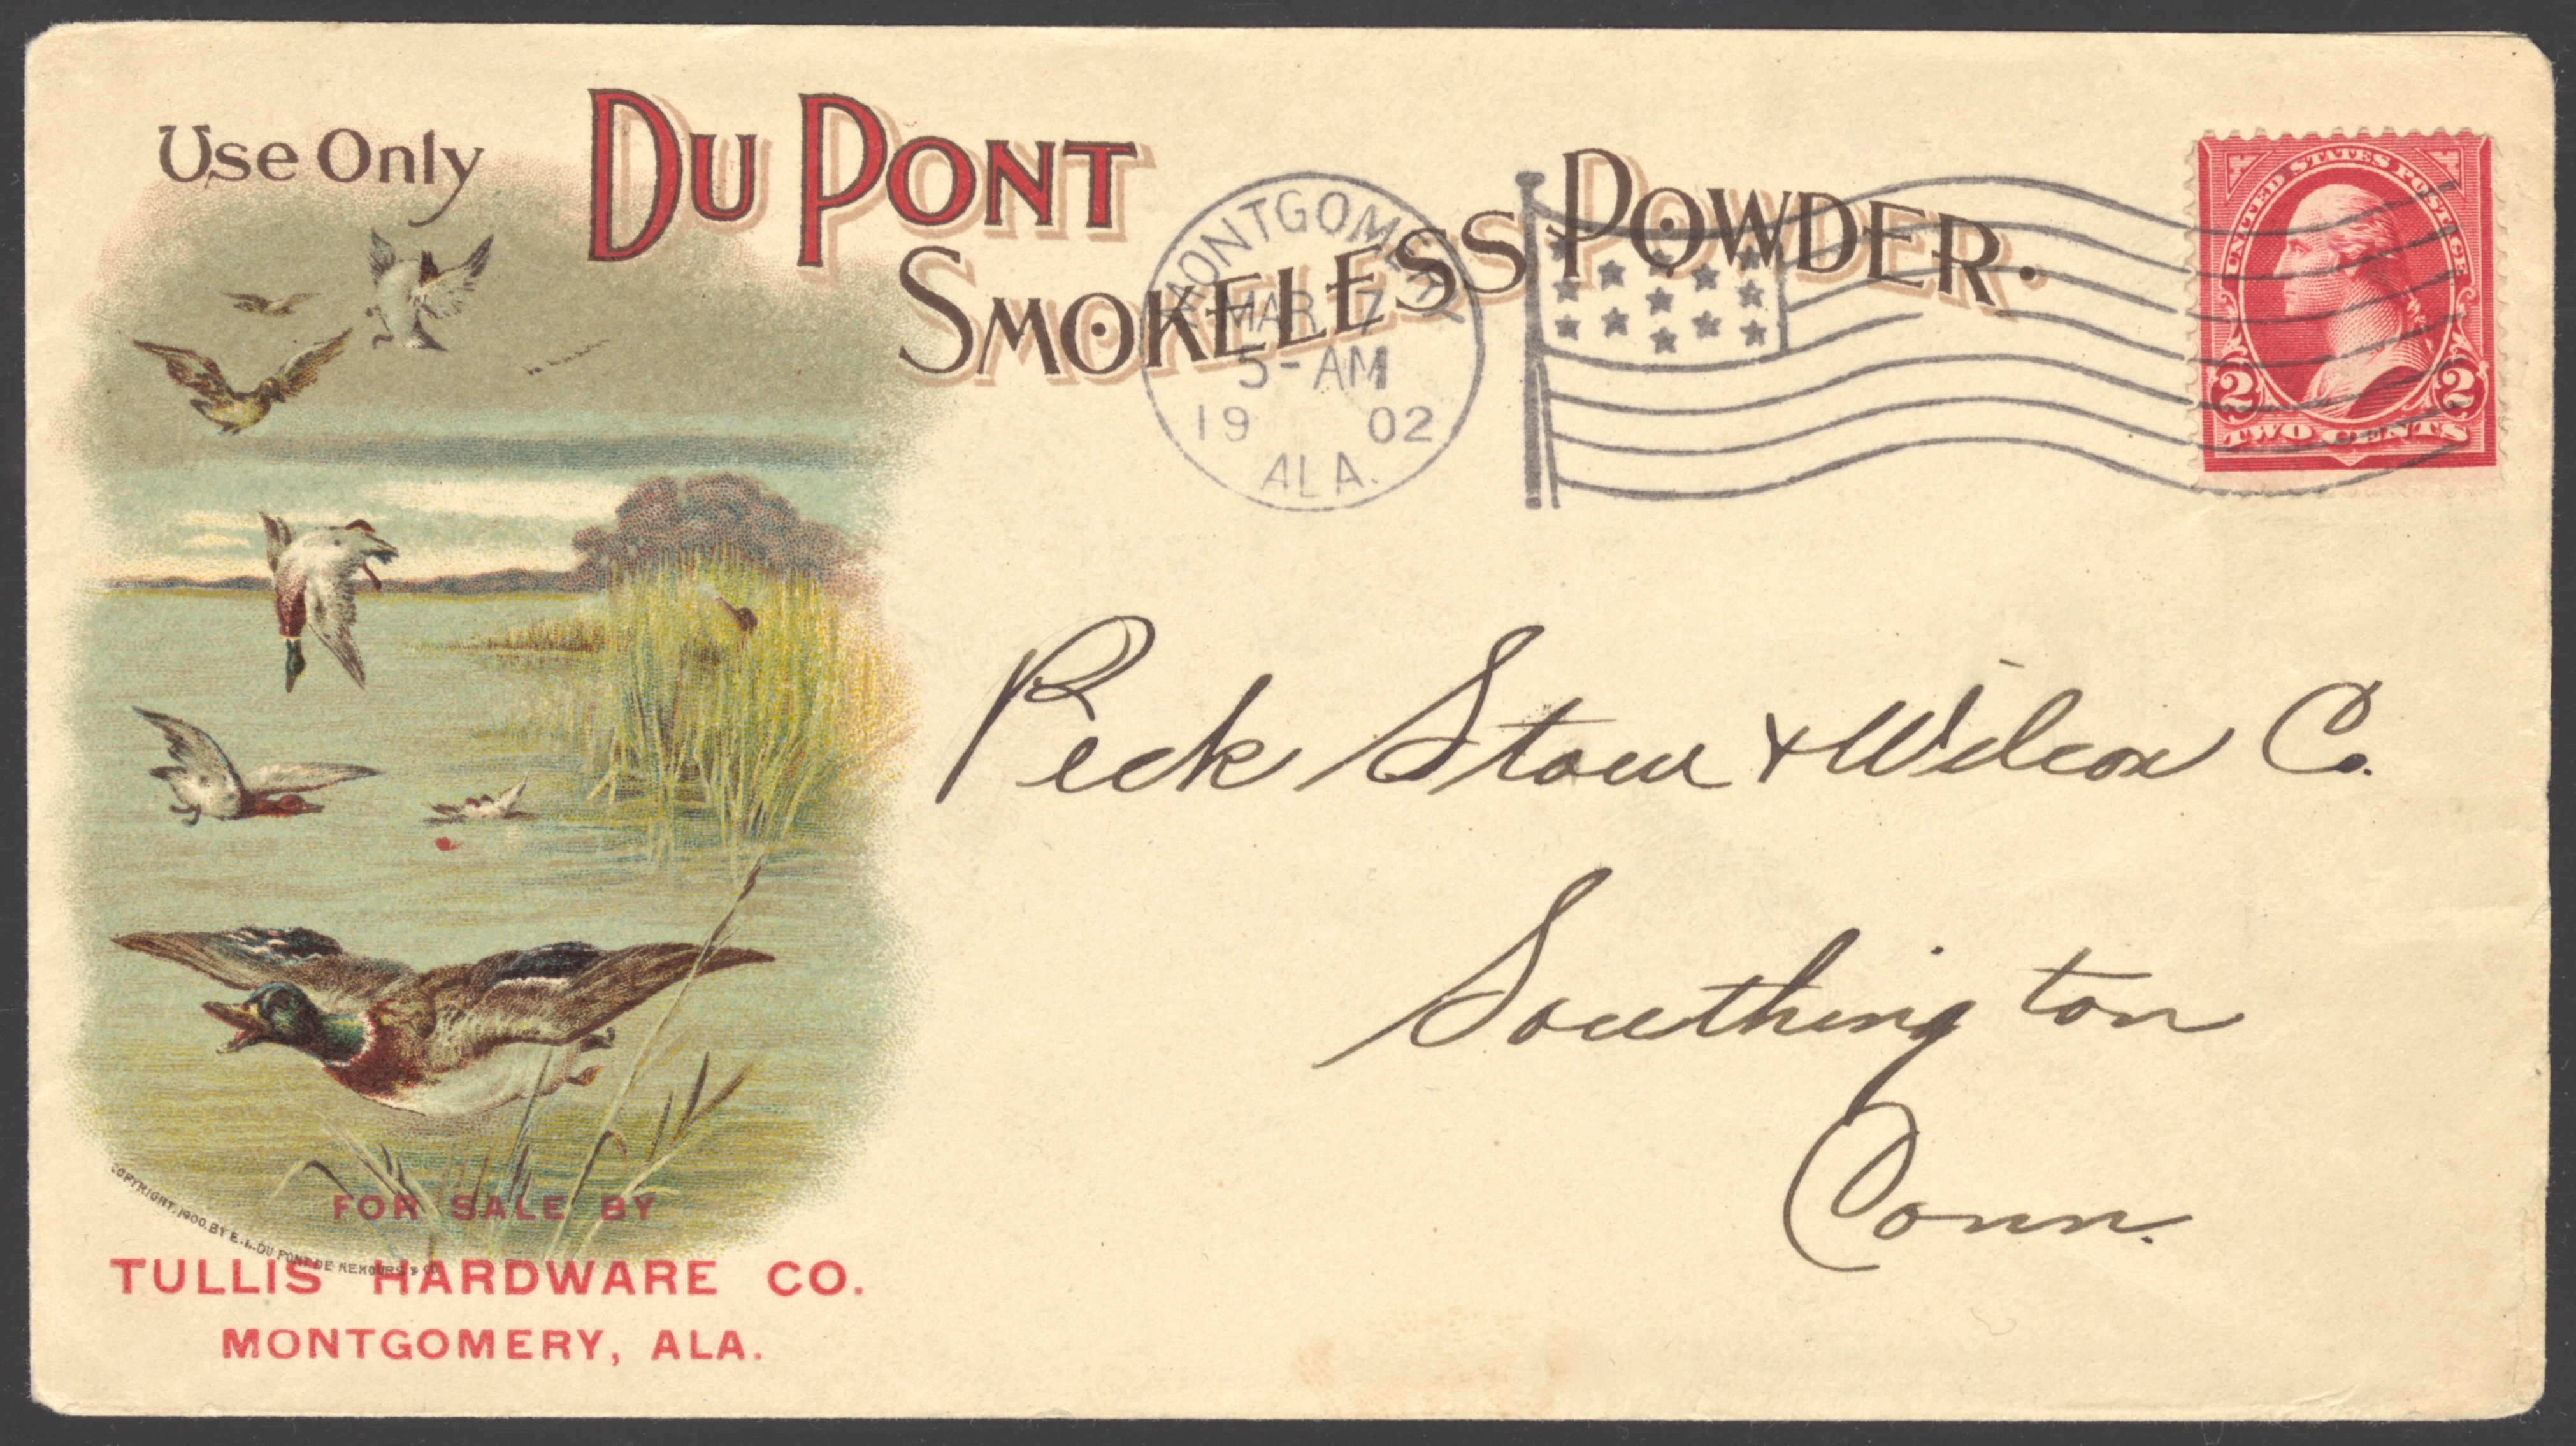 Dupont Powder Advertising Cover, used in 1902